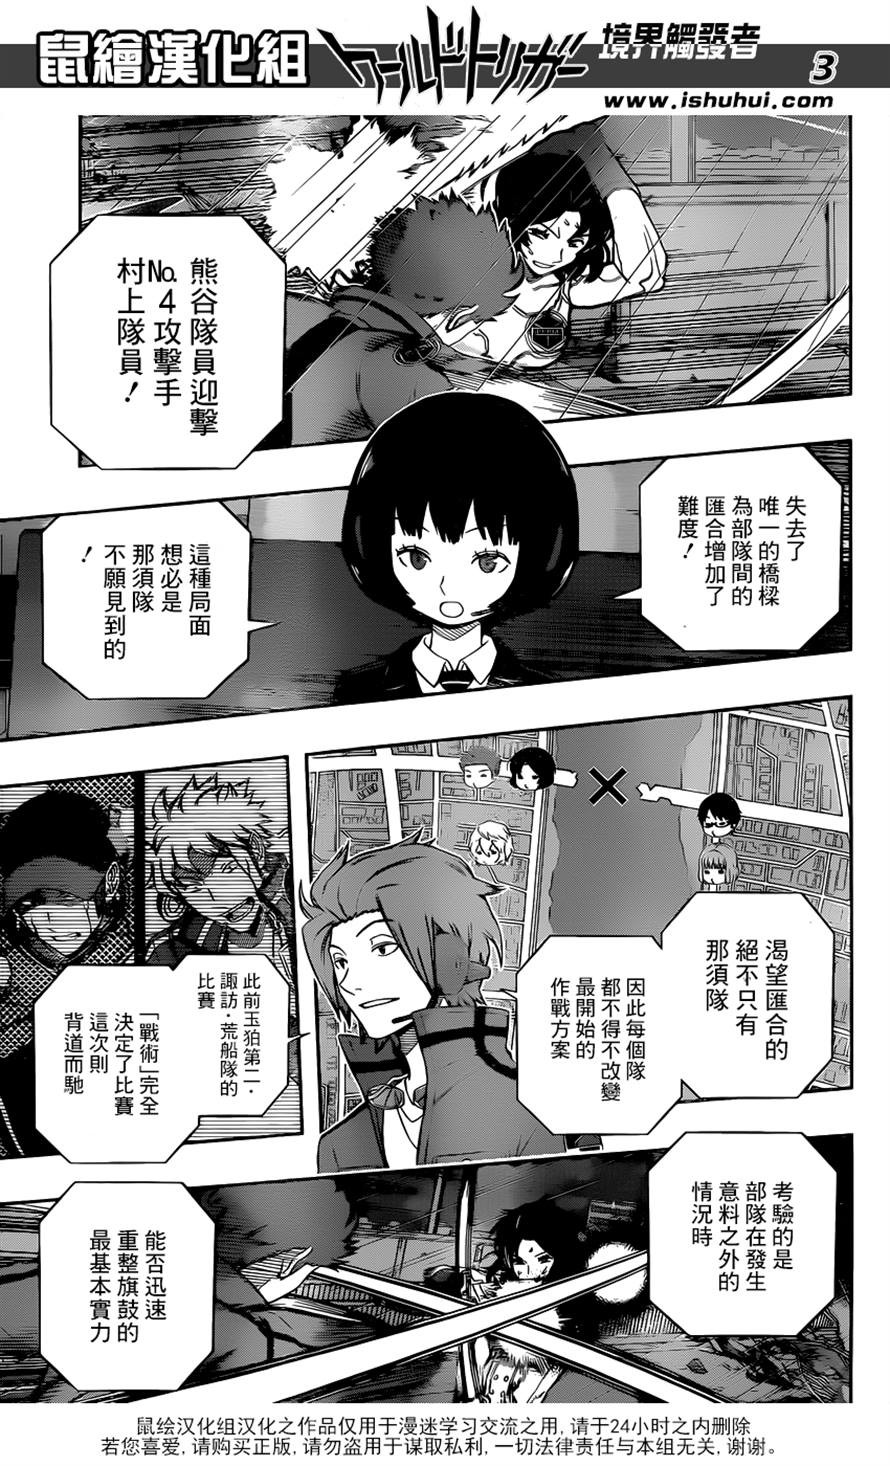 World Trigger - Chapter 97 - Page 3